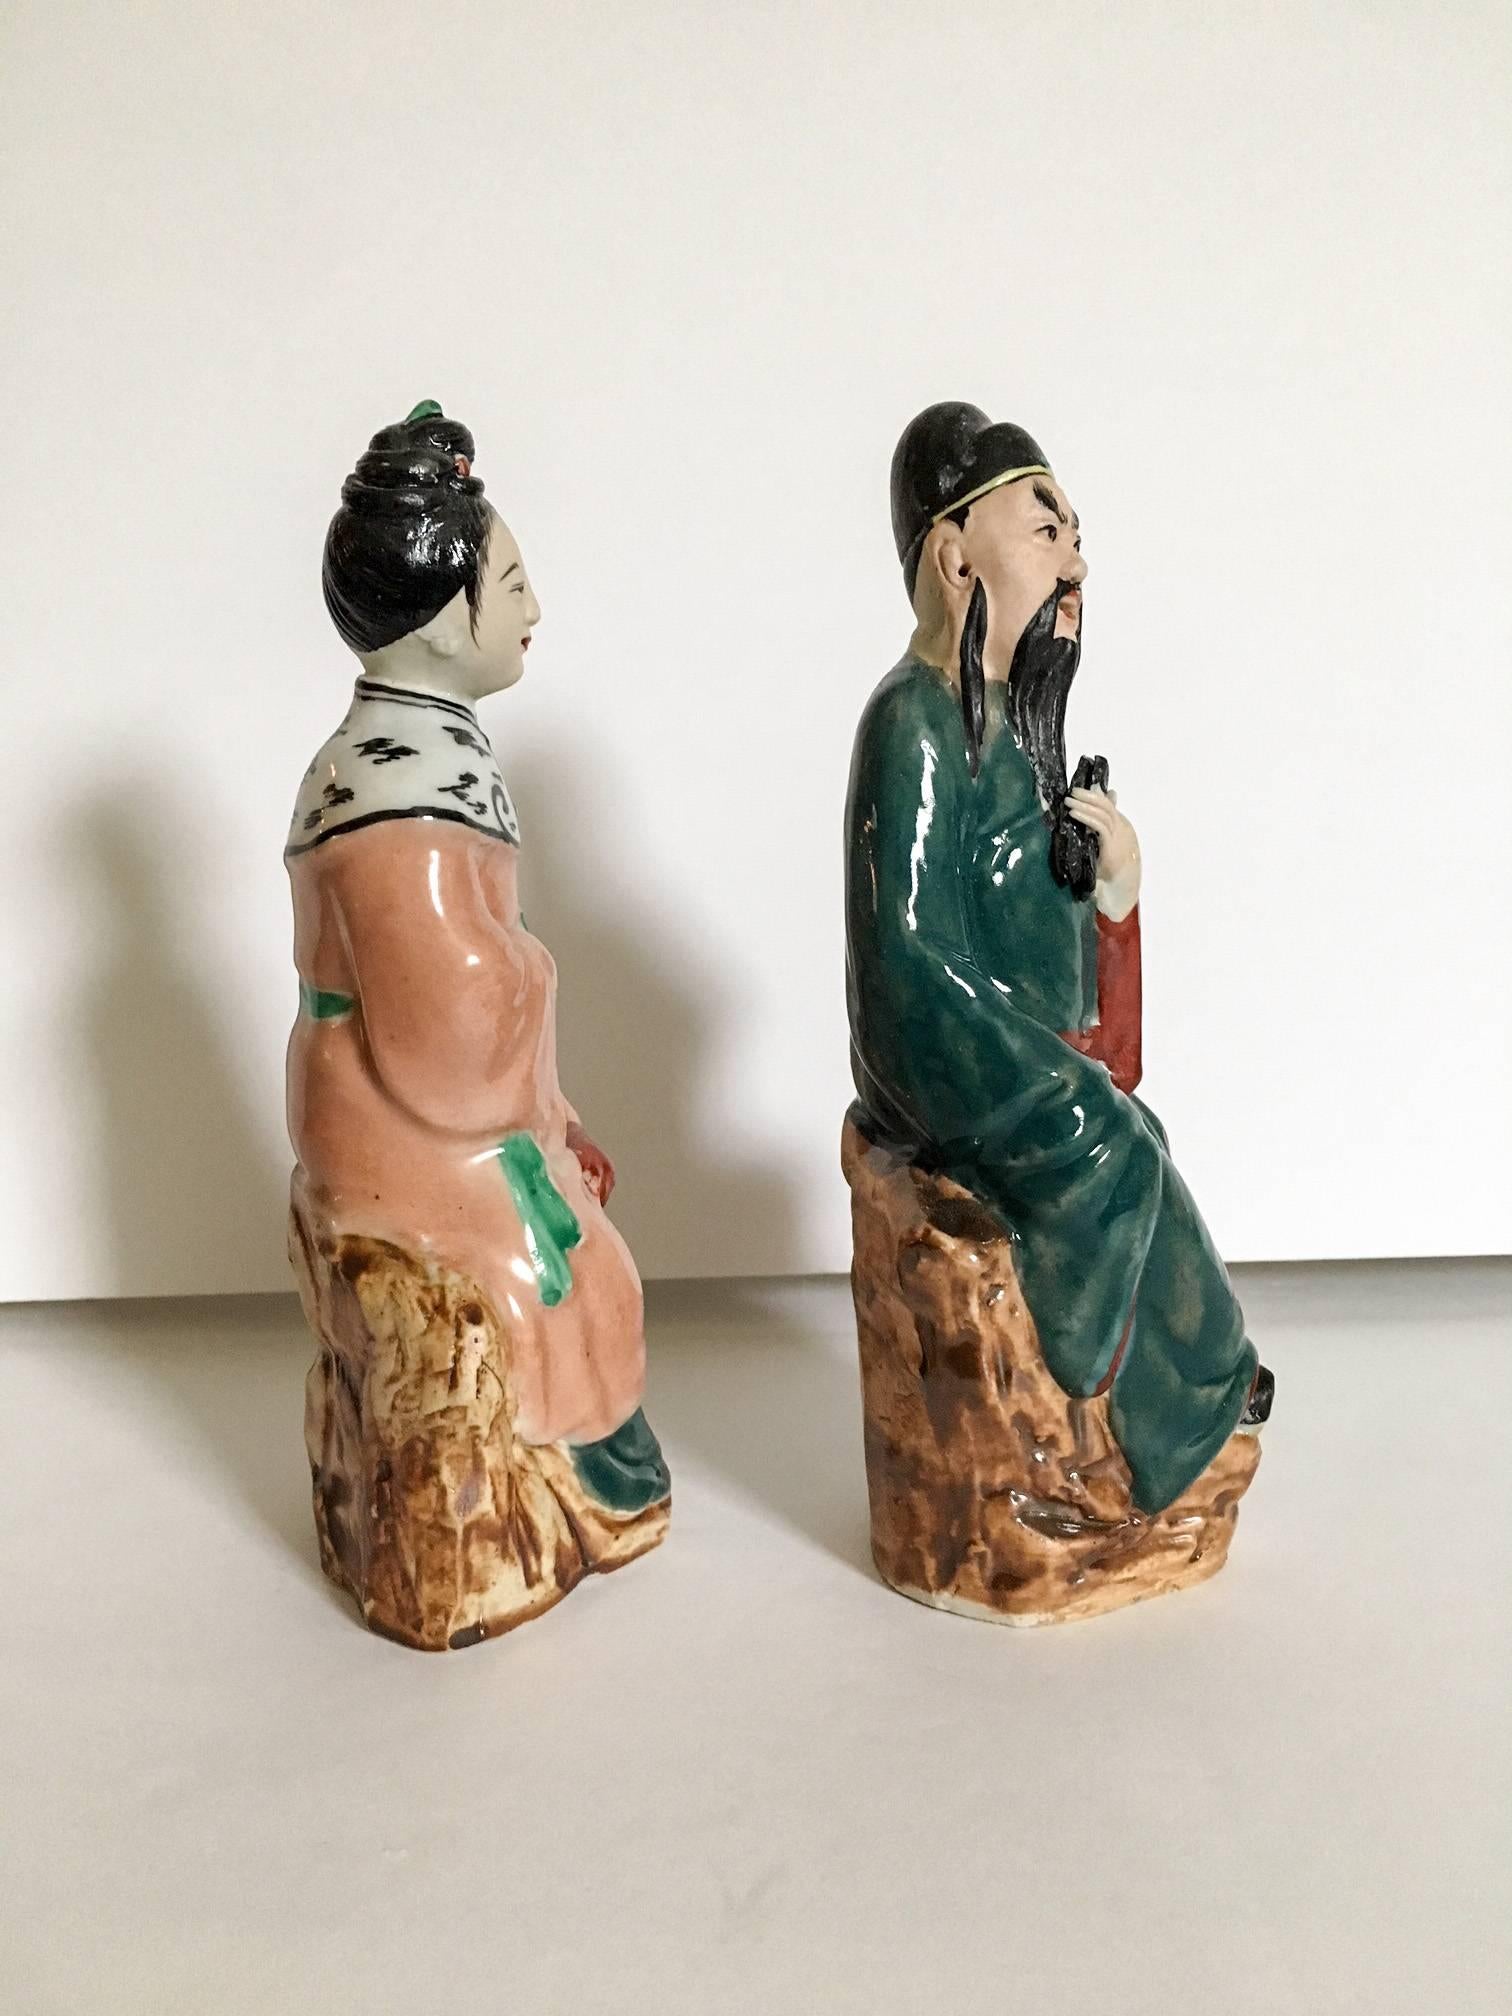 Exquisite pair of antique Chinese mud figure statues of a seated emperor and empress. Embossed on the bottom; maker unknown. Beautifully hand-painted with detailed facial features.